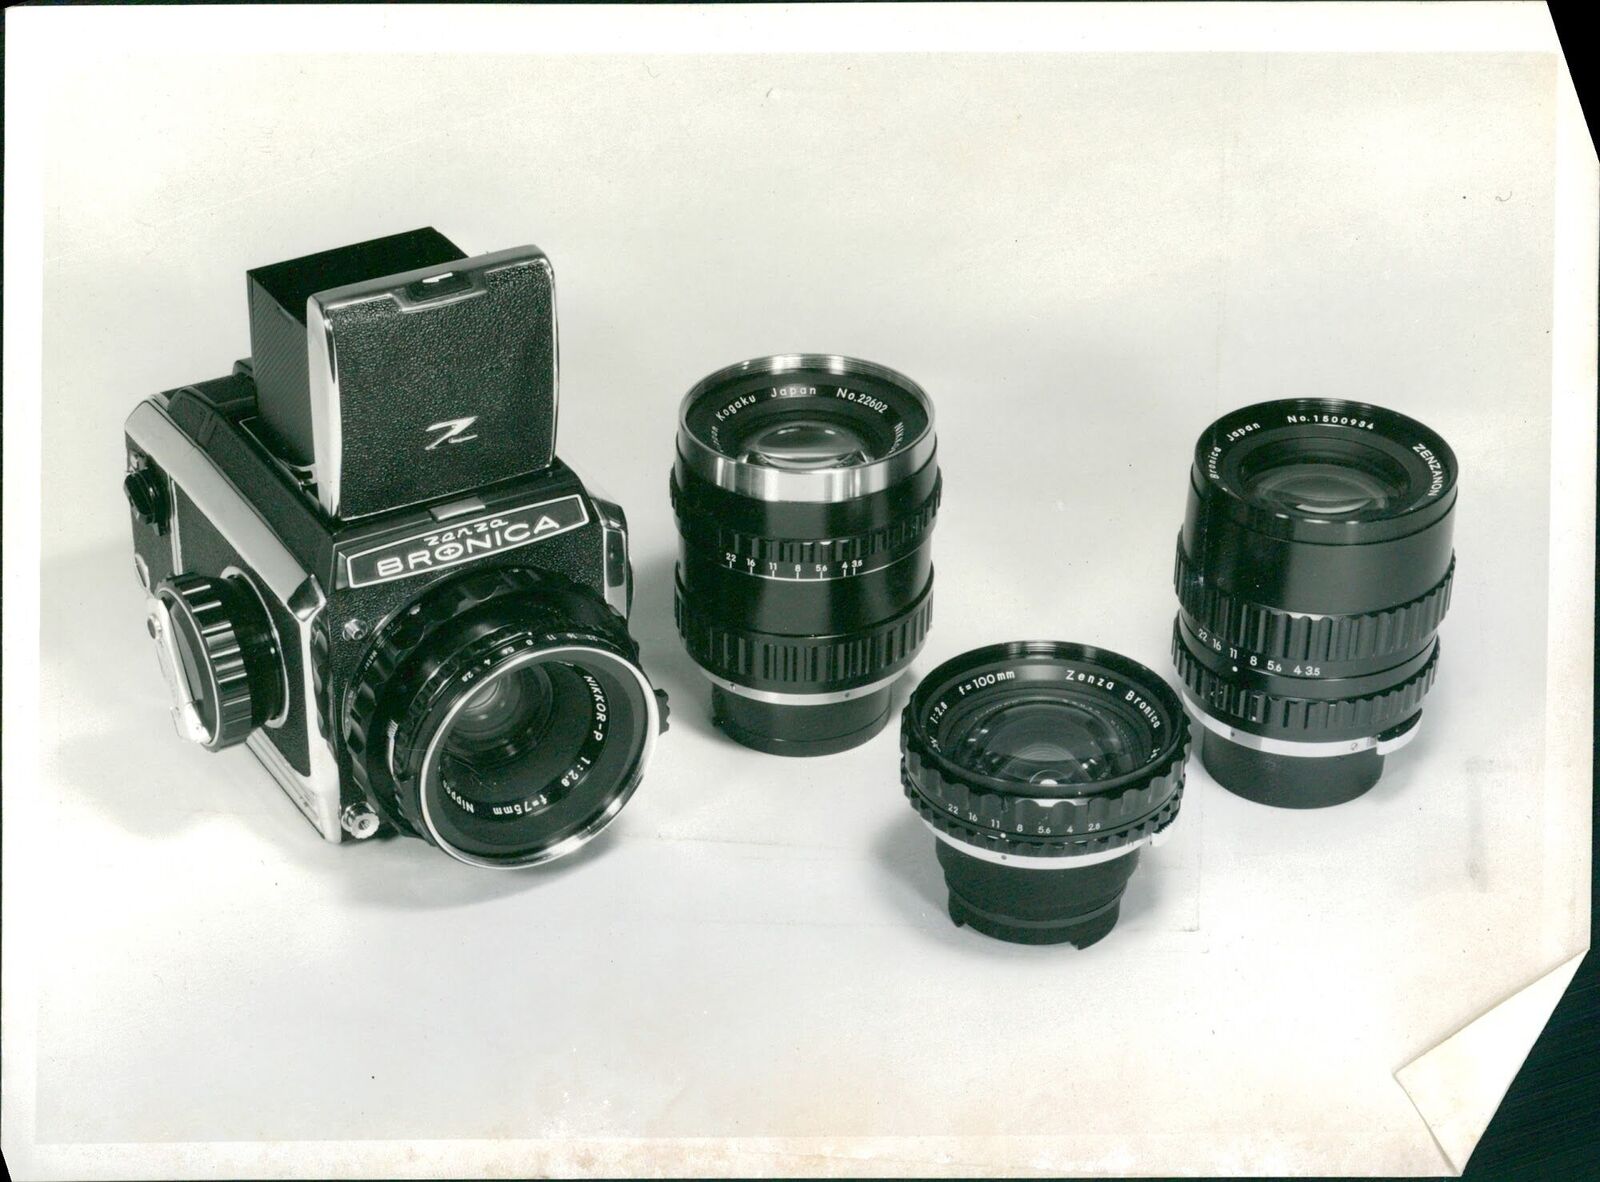 Zenza Bronica camera and lenses - Vintage Photograph 3306928